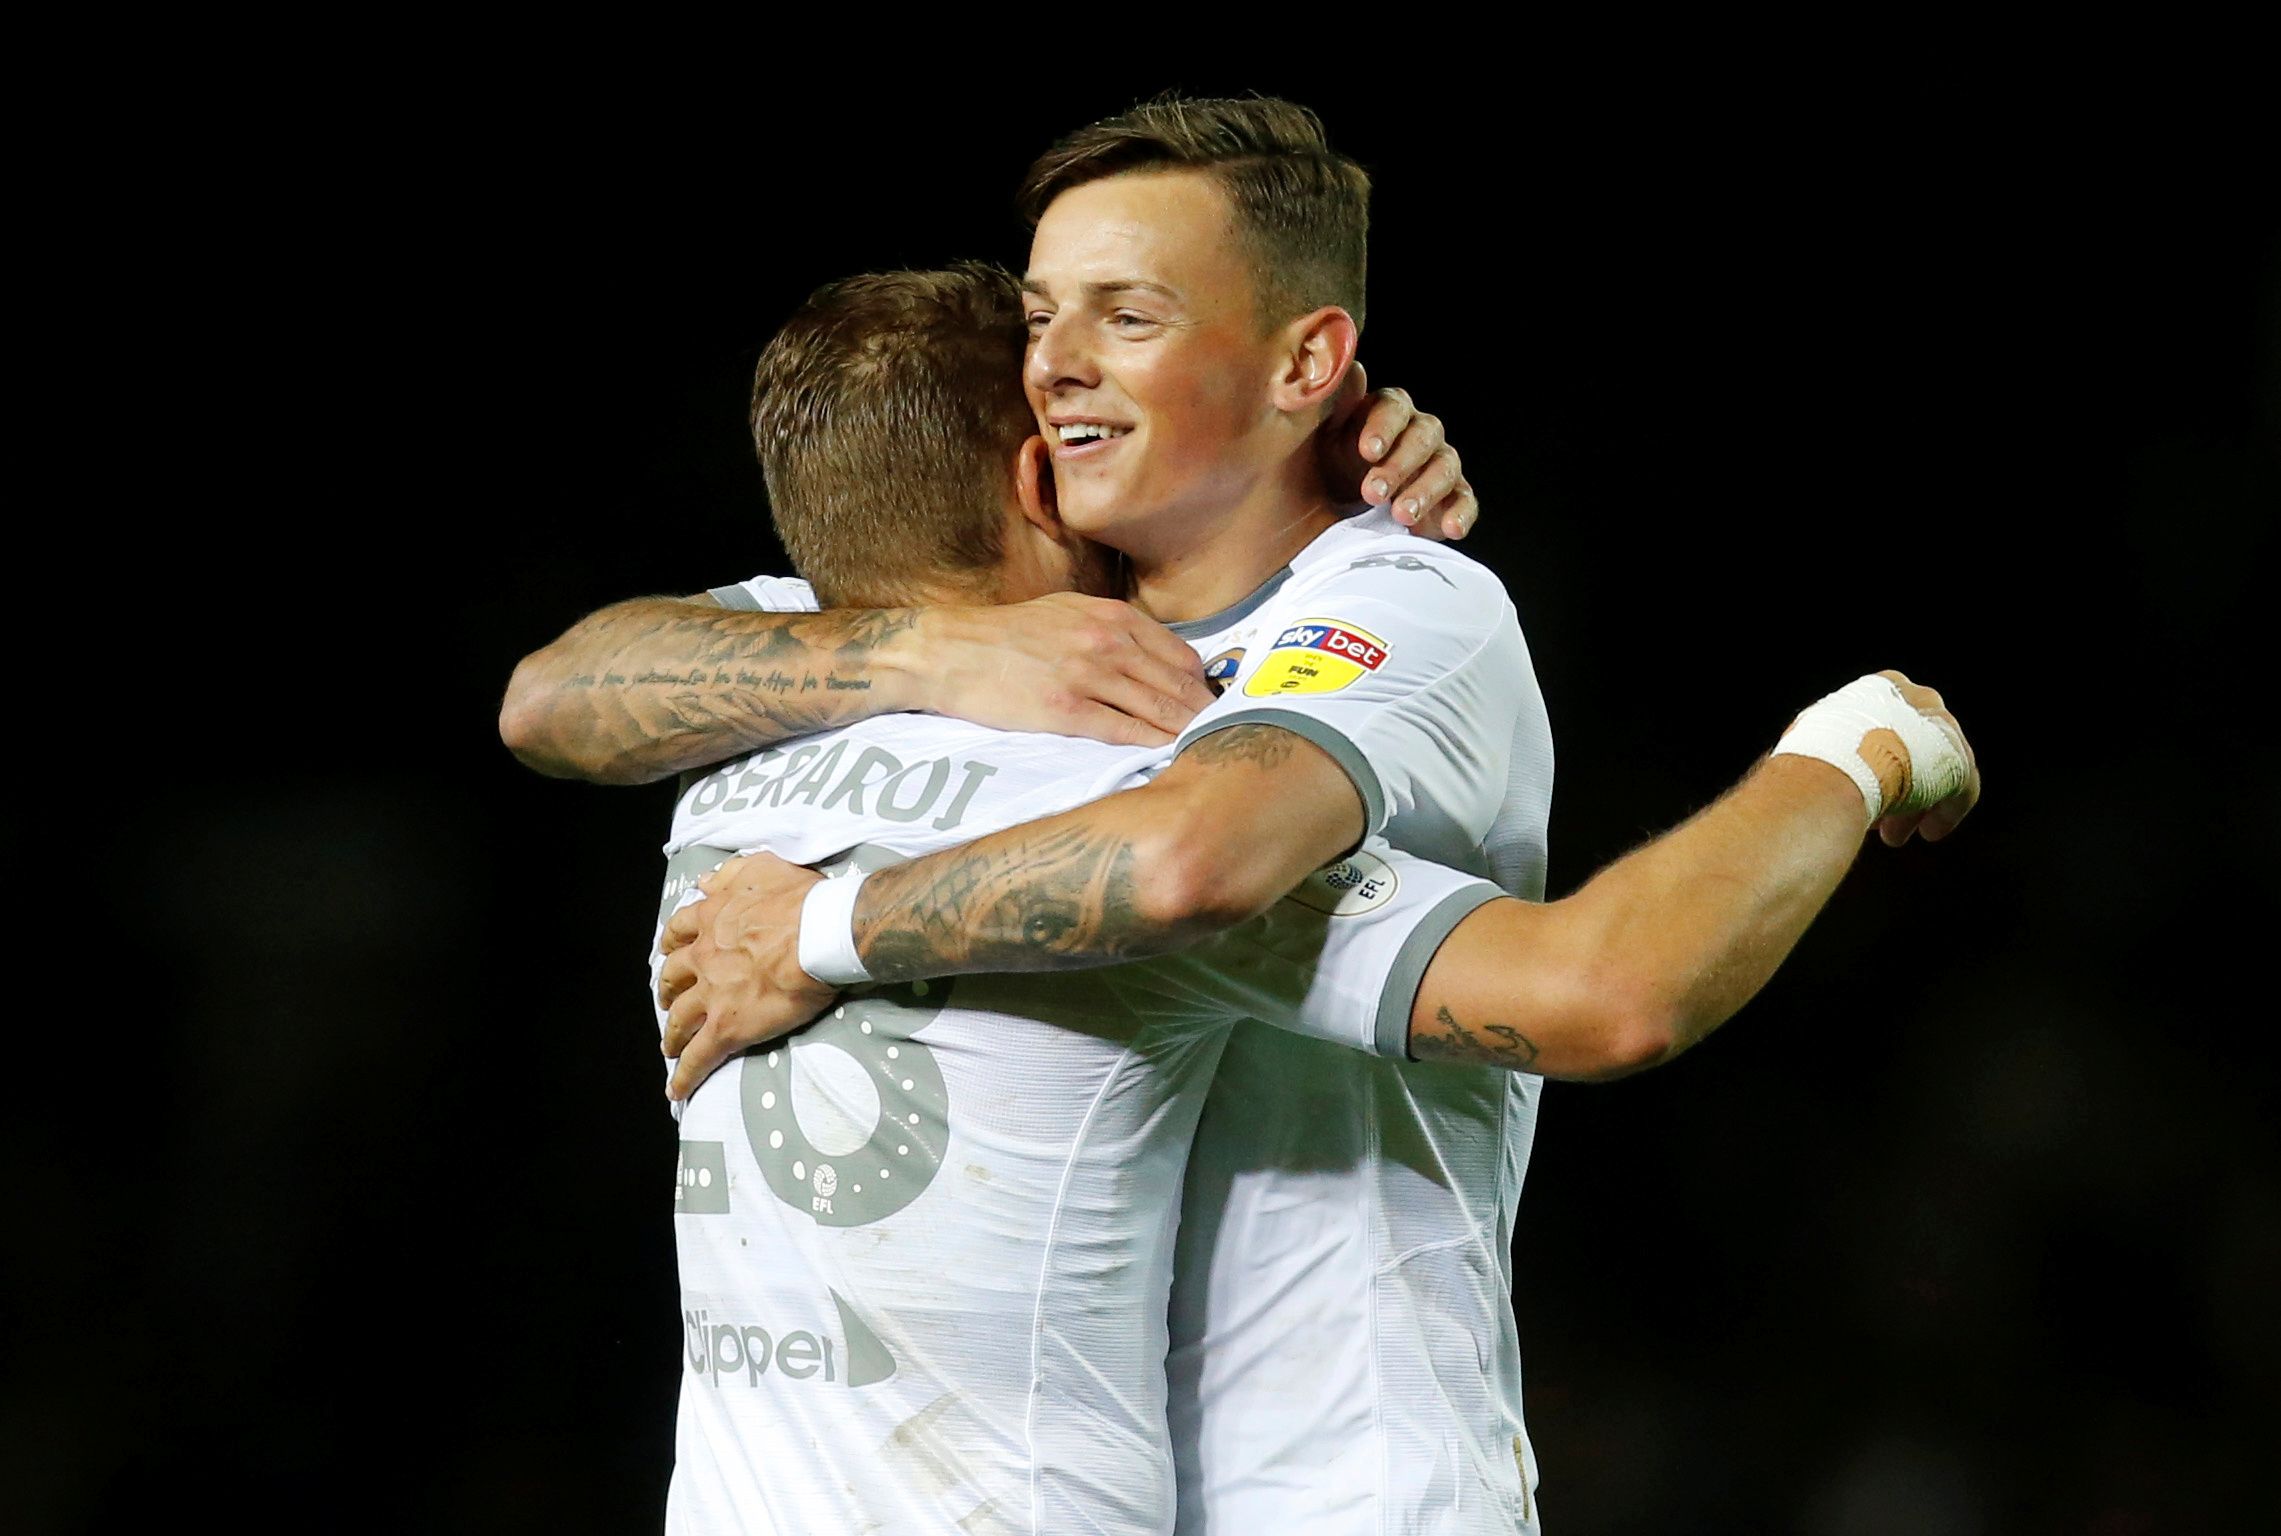 Soccer Football - Championship - Leeds United v West Bromwich Albion - Elland Road, Leeds, Britain - October 1, 2019  Leeds United's Ben White and Gaetano Berardi celebrate after the match  Action Images/Ed Sykes  EDITORIAL USE ONLY. No use with unauthorized audio, video, data, fixture lists, club/league logos or 